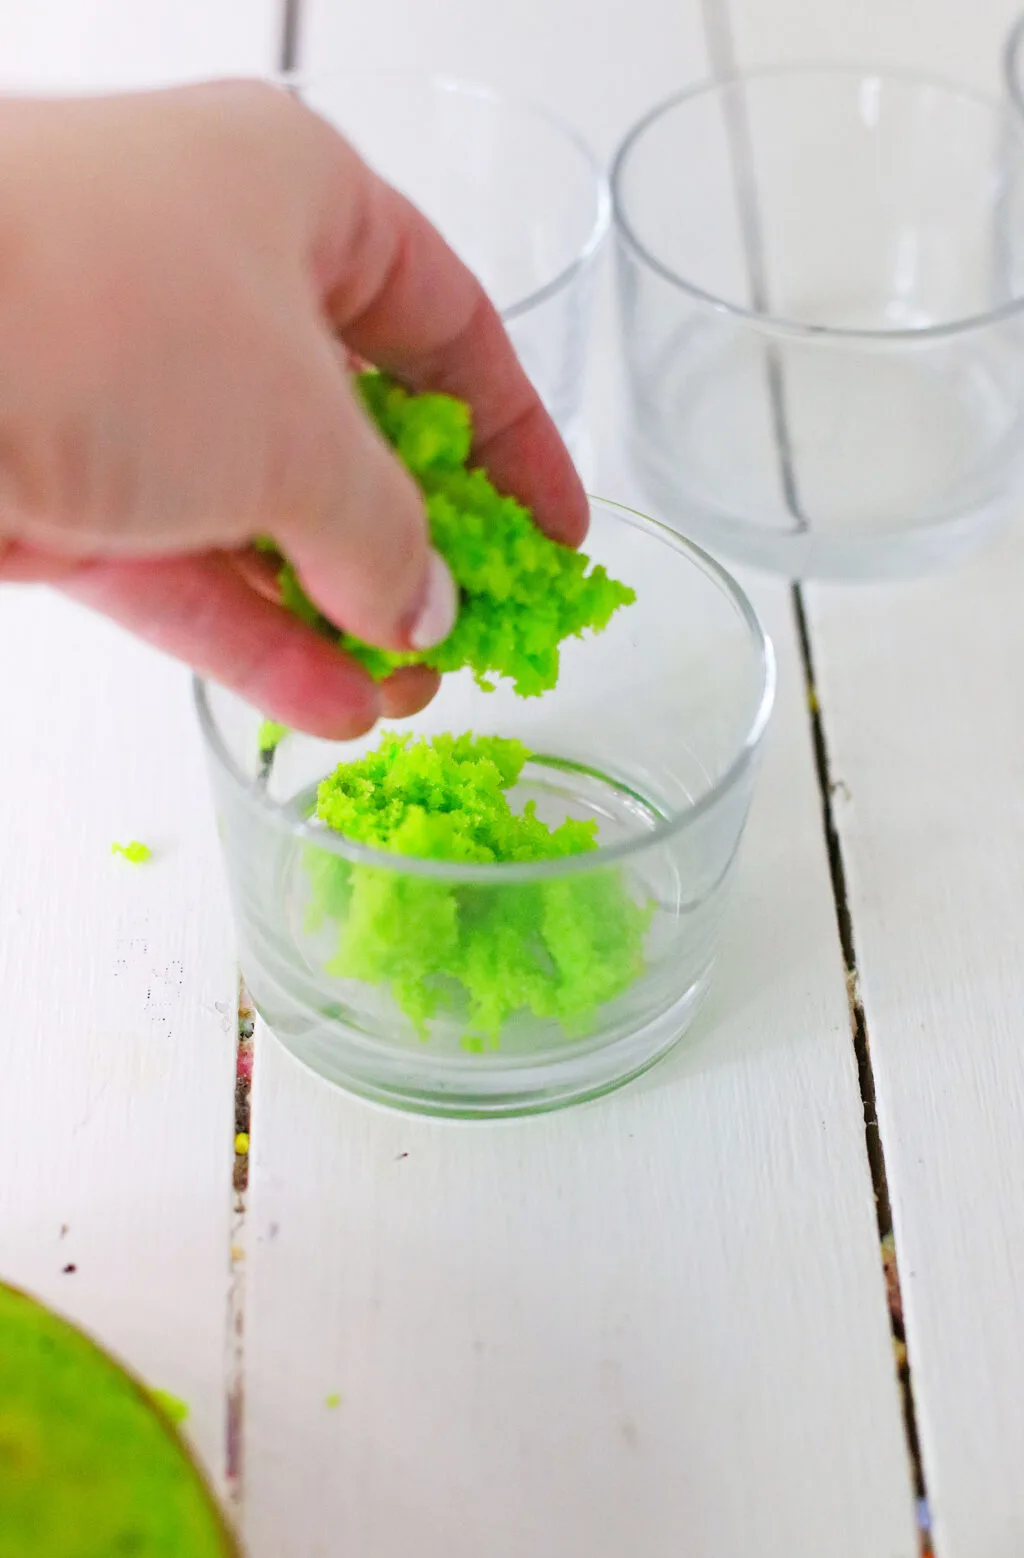 crumbled green cake being put into serving bowl